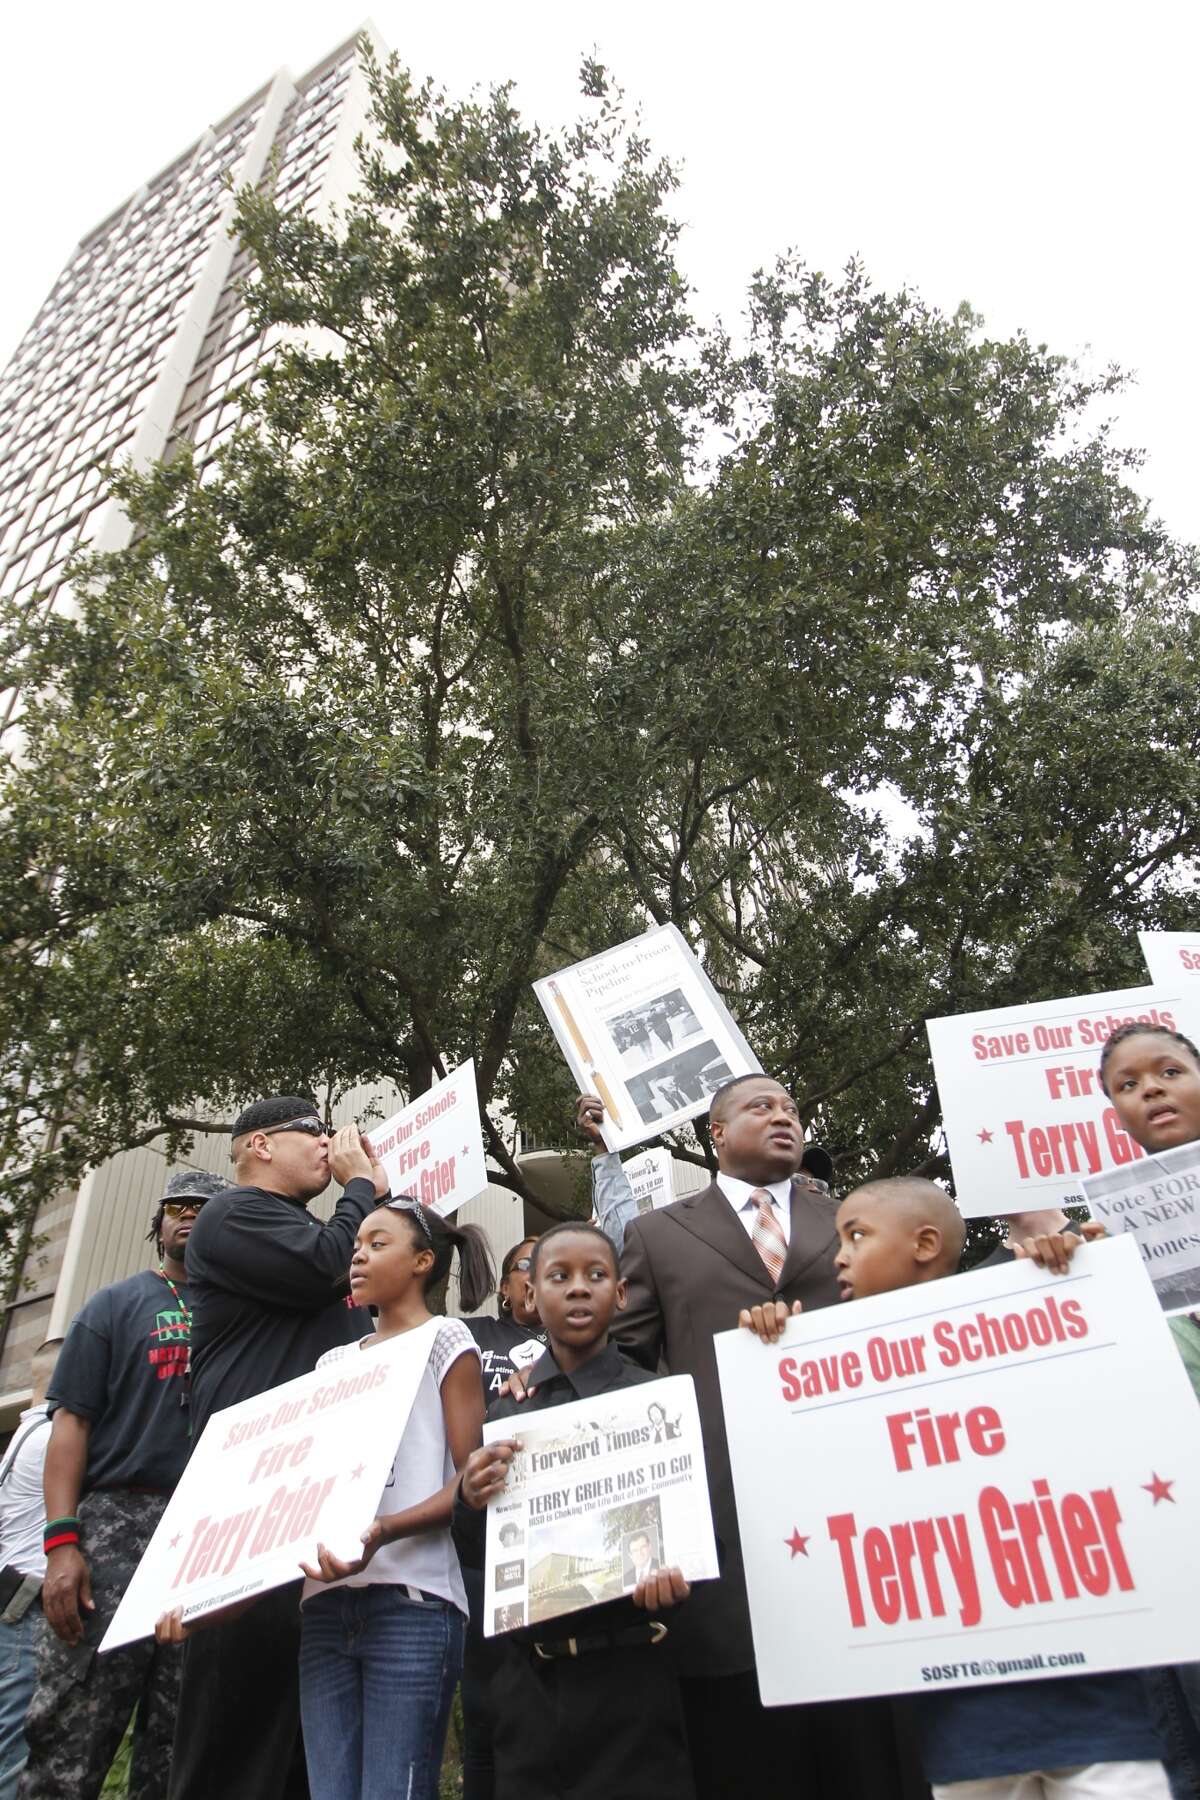 About two dozen leaders in the black community protested Sunday outside HISD Superintendent Terry Grier's home, calling for his firing for plans to close schools their neighborhoods. (Johnny Hanson / Houston Chronicle)